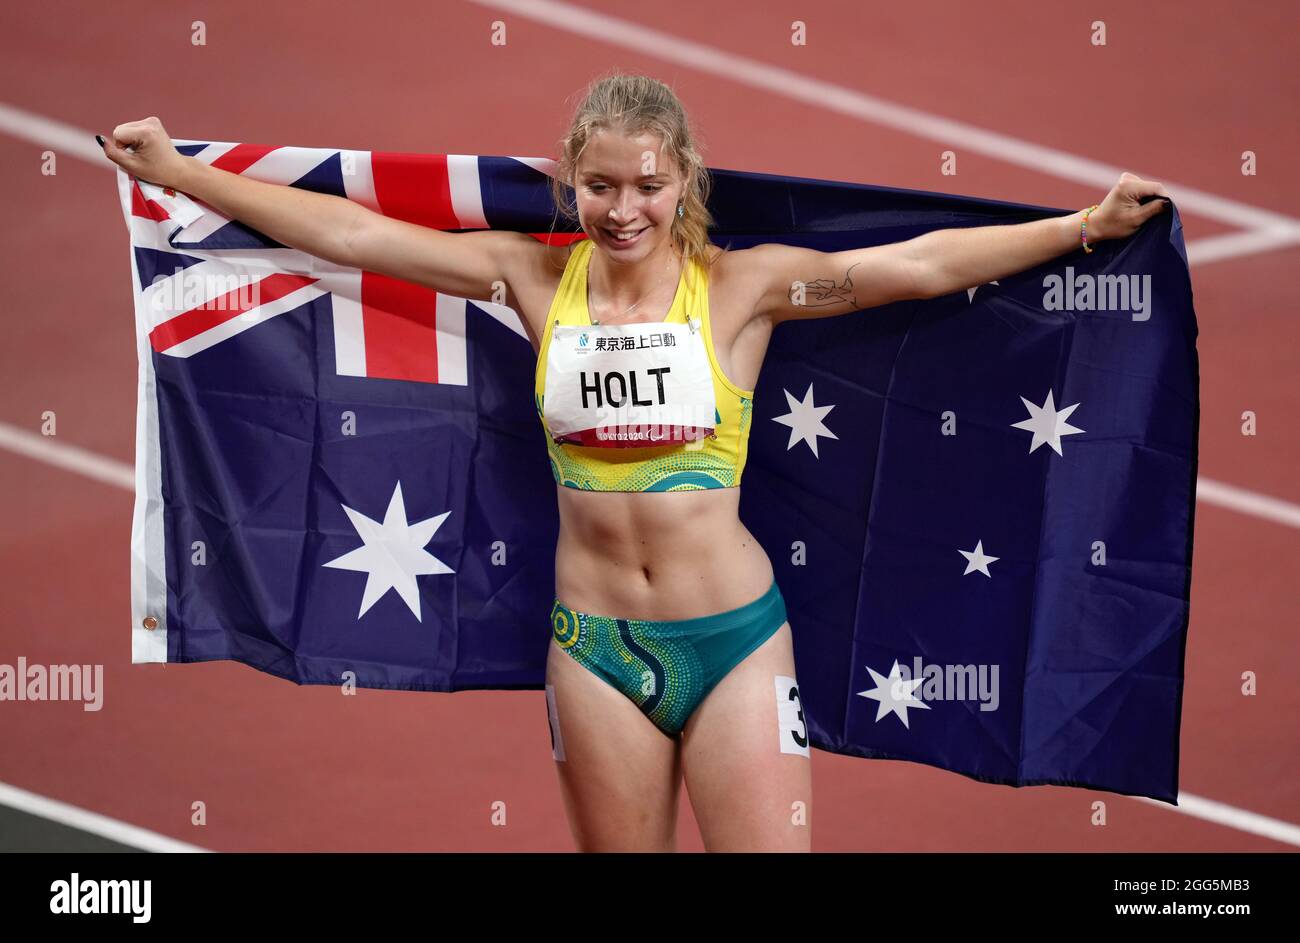 Australia S Isis Holt After Winning Silver In The Women S 200m T35 During The Athletics At The Olympic Stadium On Day Five Of The Tokyo 2020 Paralympic Games In Japan Picture Date